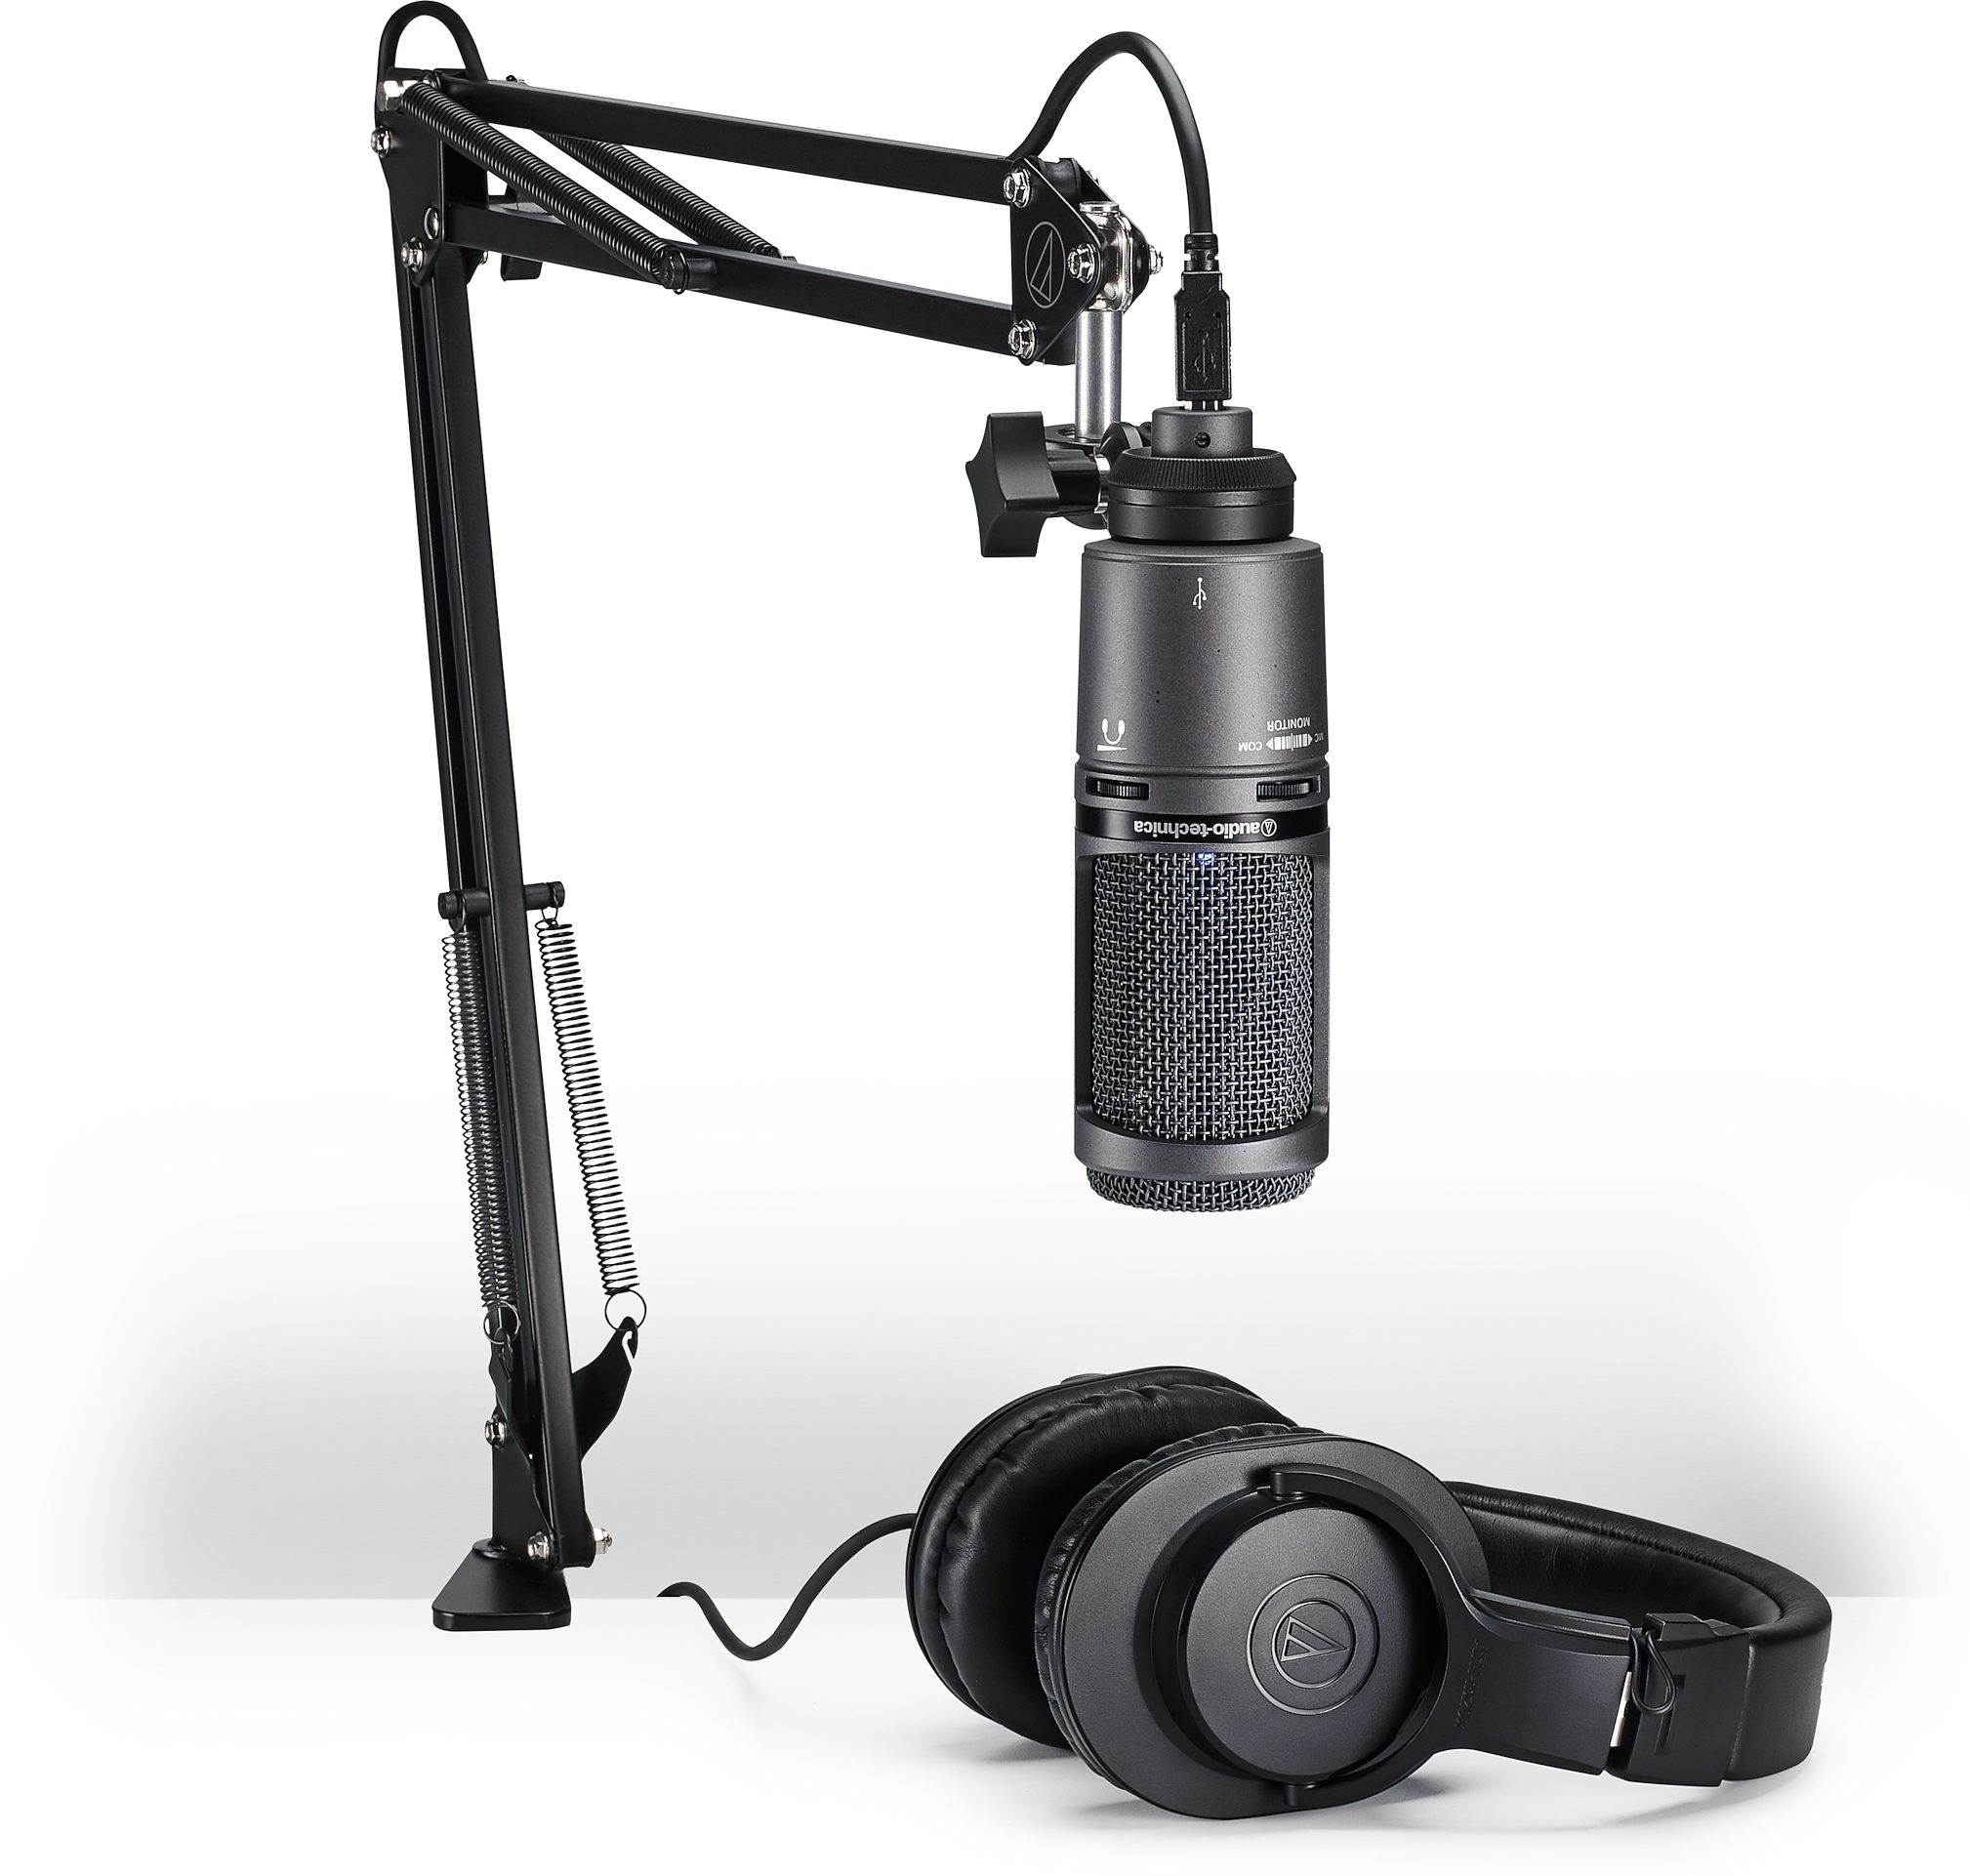 Audio-Technica AT2020 Review: More Than A Budget Mic